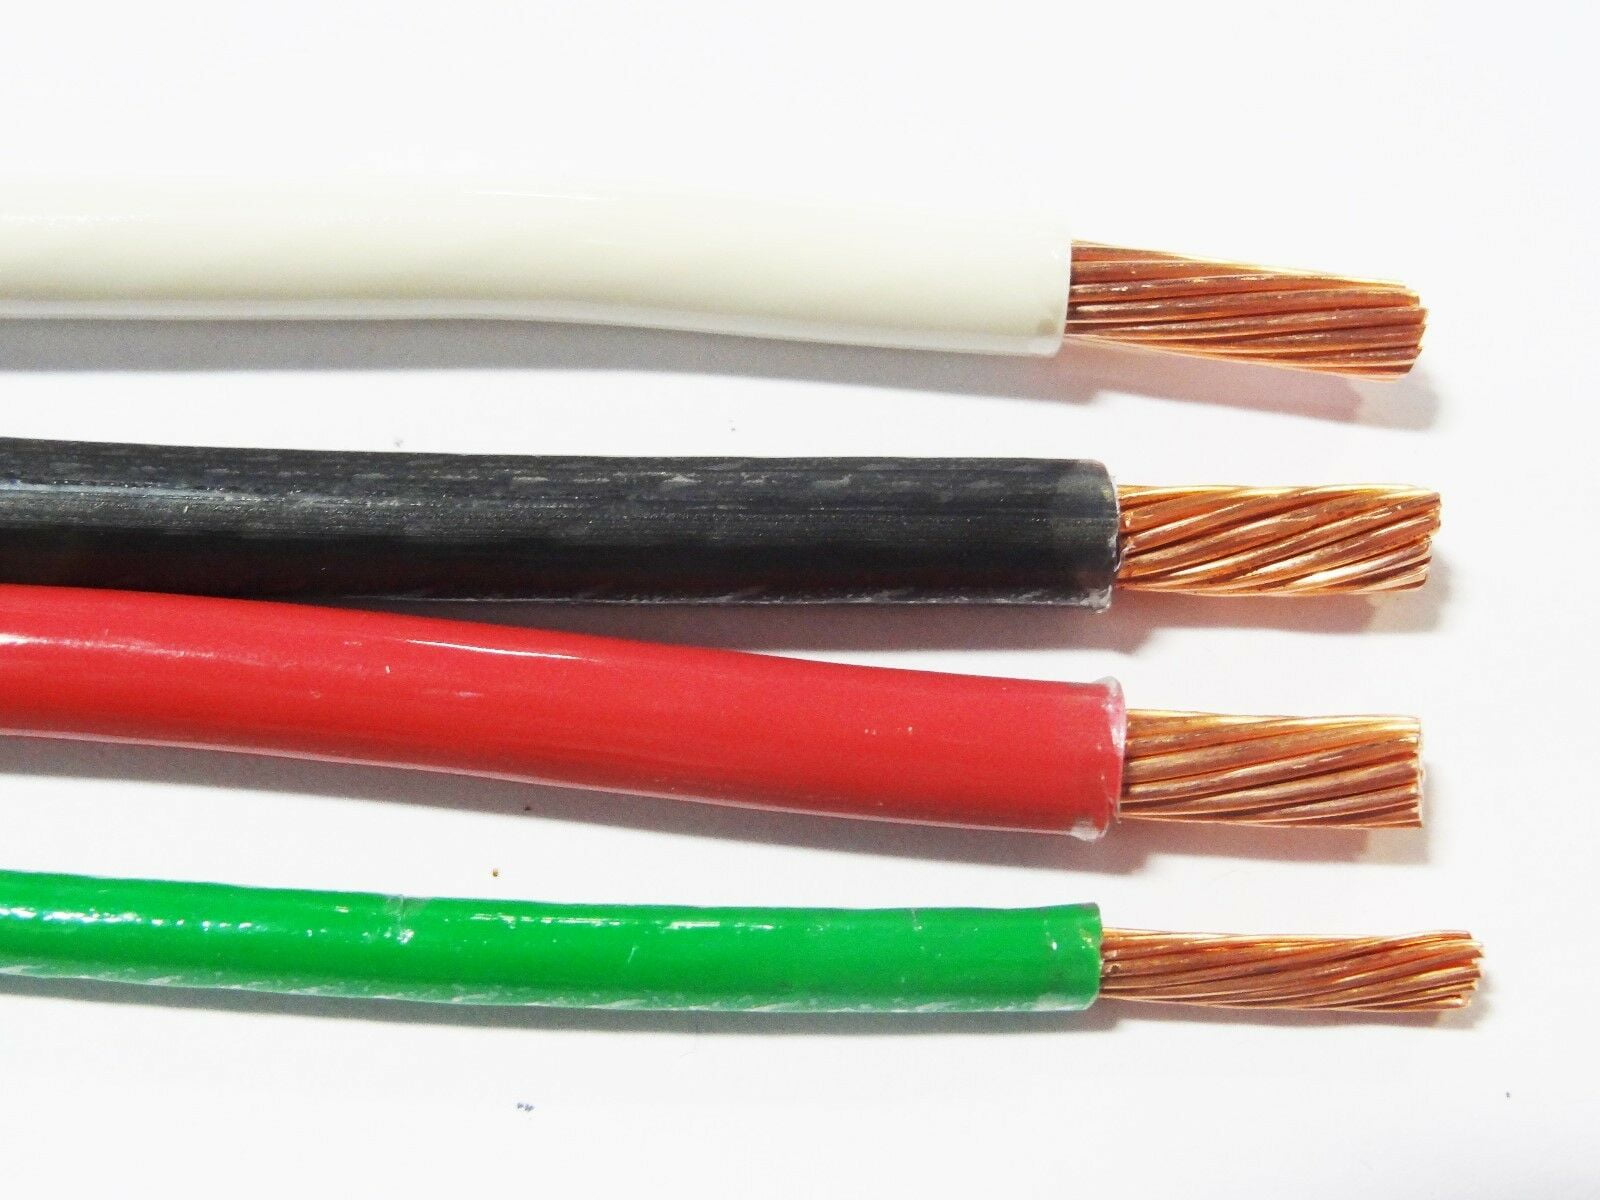 16 GAUGE TFFN TEWN WIRE 600V COPPER GROUND WIRE BLACK RED WHITE GREEN 100 FT EA 